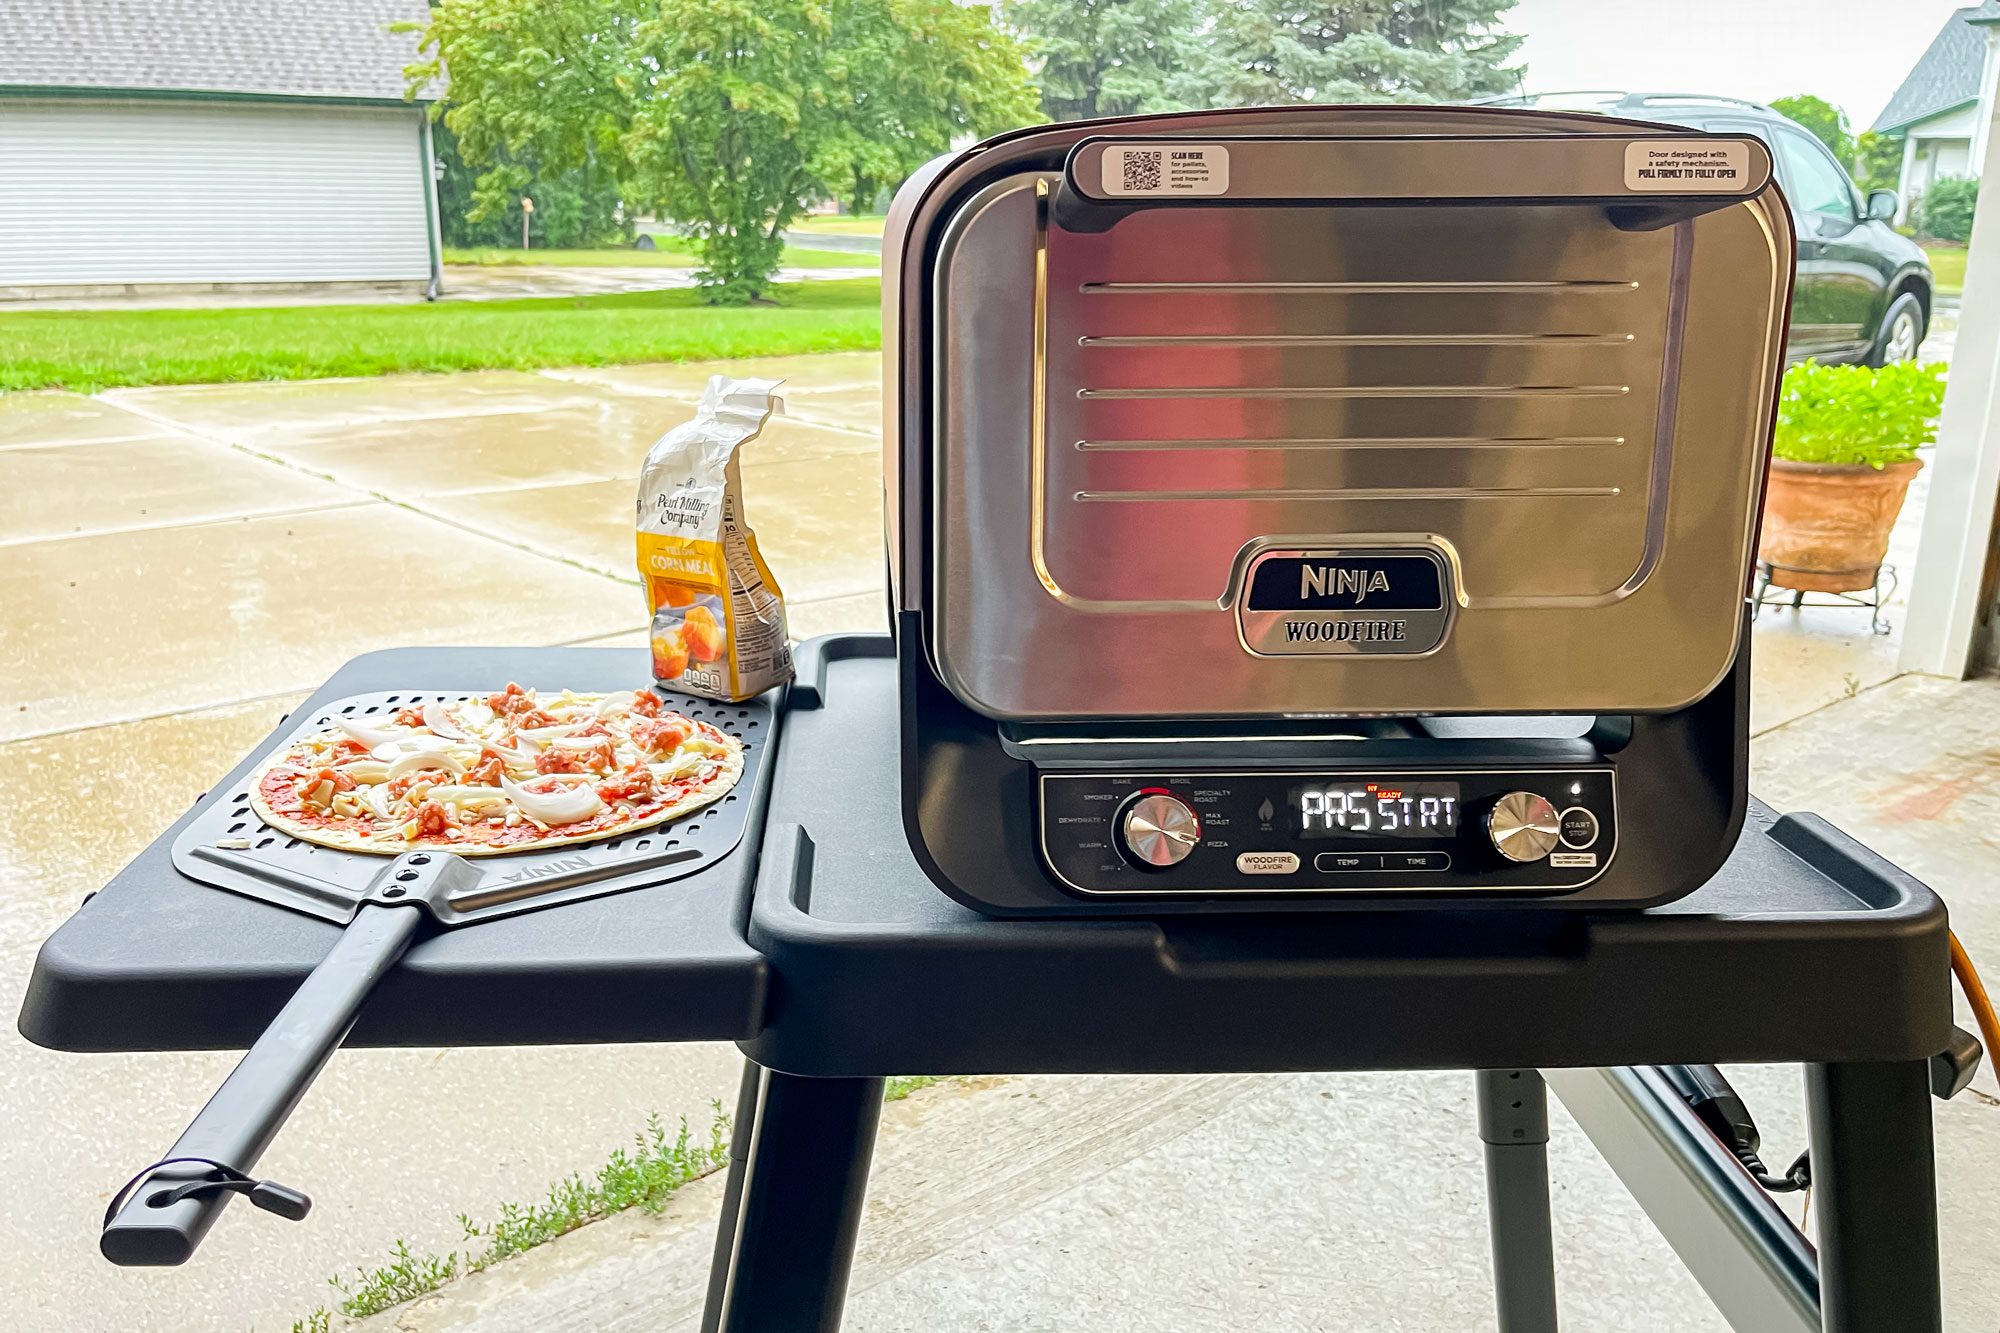 Ninja Woodfire Outdoor Oven Reviewed and Rated